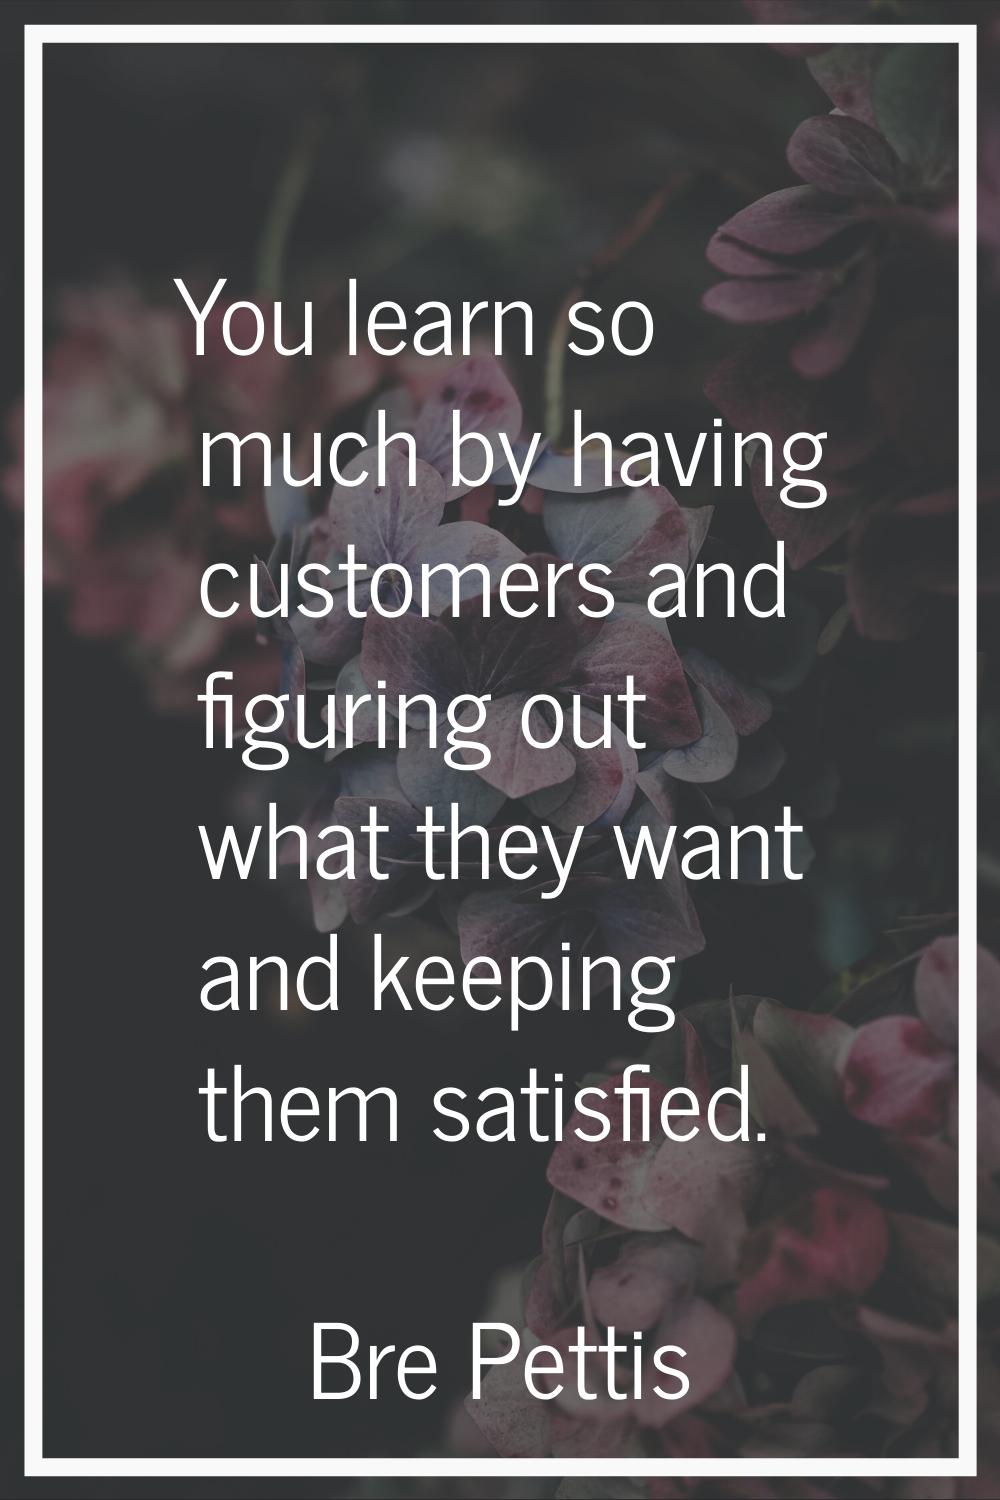 You learn so much by having customers and figuring out what they want and keeping them satisfied.